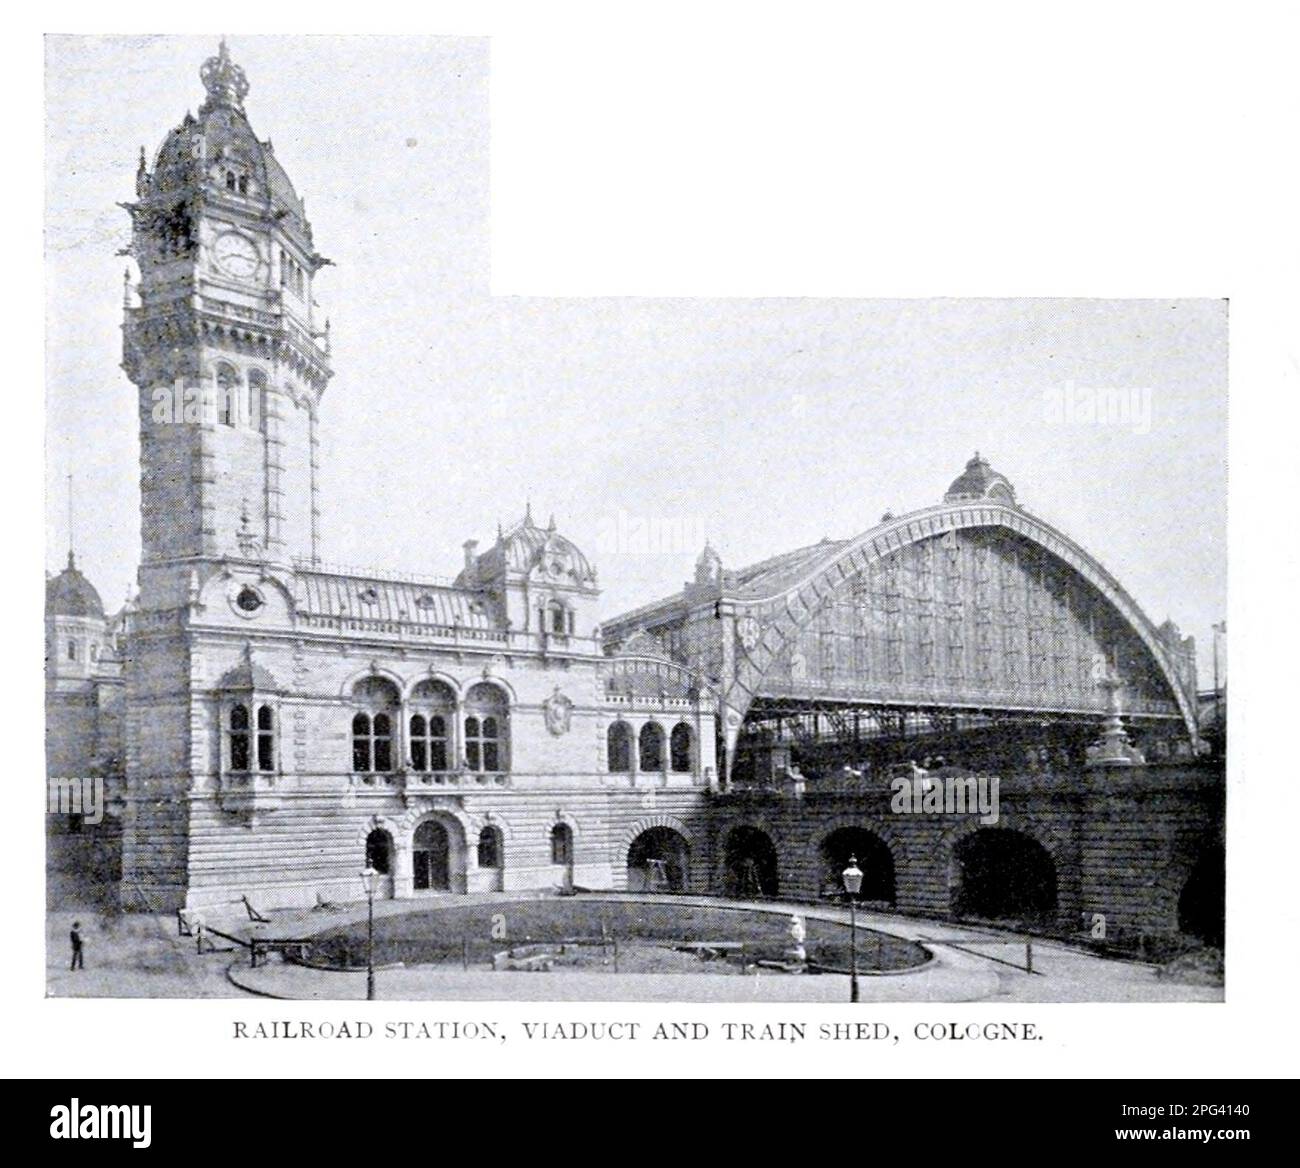 Railroad Station, Viaduct and Train Shed, Cologne, Germany from the Article THE ARCHITECTURE OF RAILROAD STATIONS by Bradford L. Gilbert  from The Engineering Magazine DEVOTED TO INDUSTRIAL PROGRESS Volume IX April to September, 1895 NEW YORK The Engineering Magazine Co Stock Photo